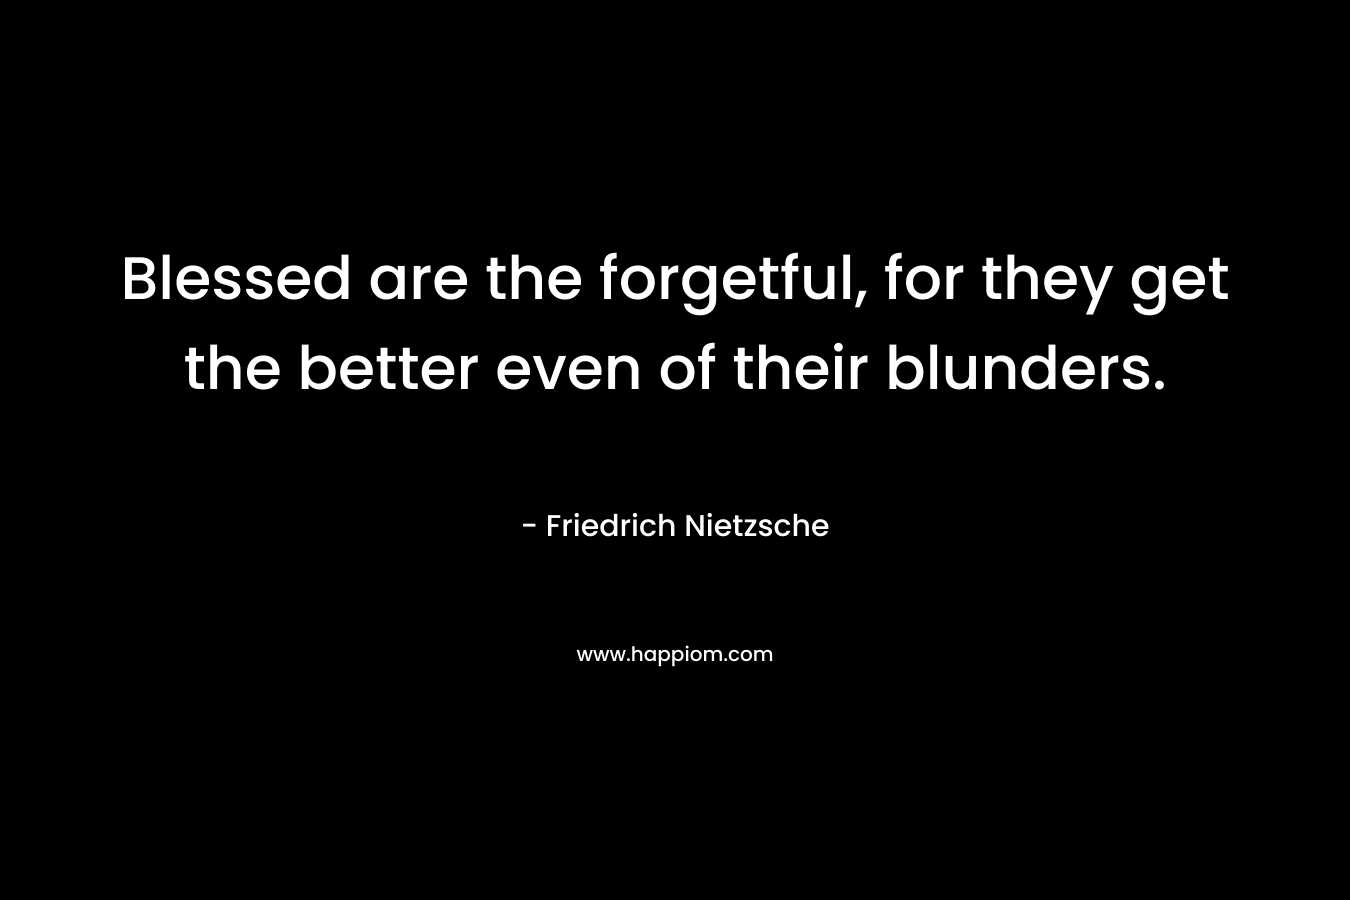 Blessed are the forgetful, for they get the better even of their blunders. – Friedrich Nietzsche